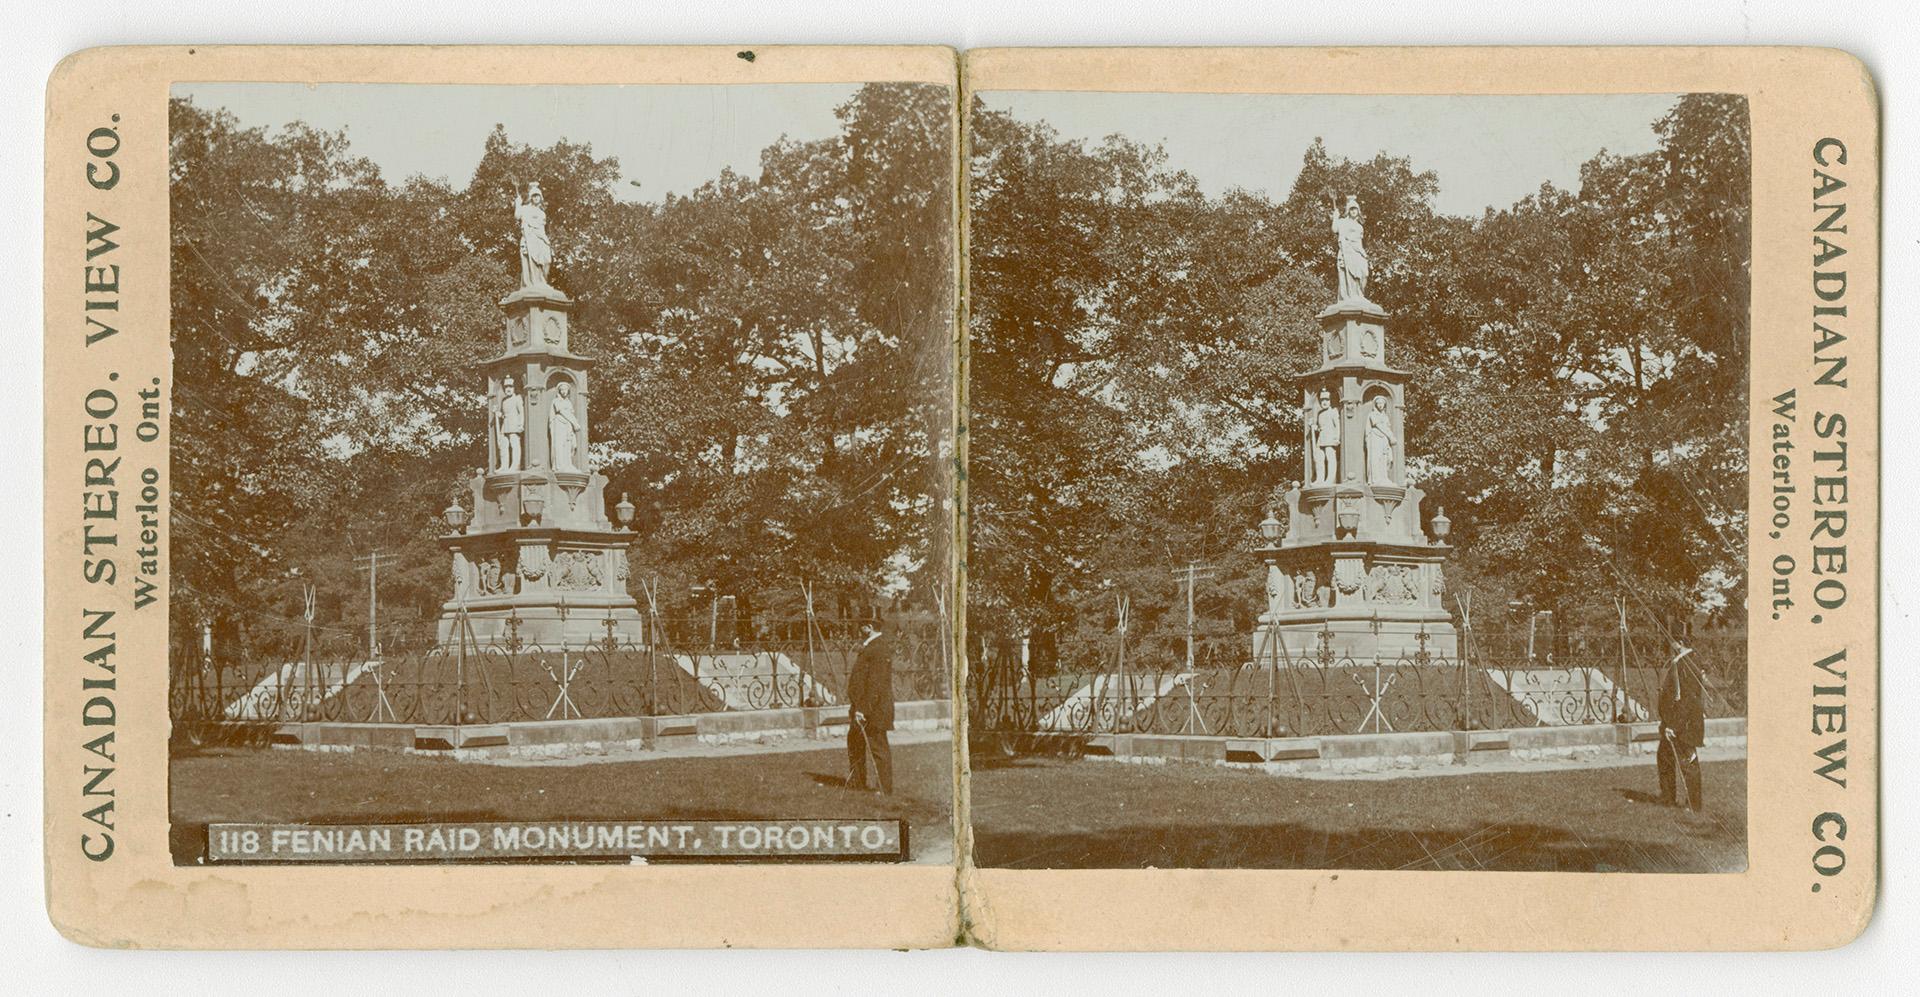 Pictures show a man in a top hat looking at a large monument with statues on it.